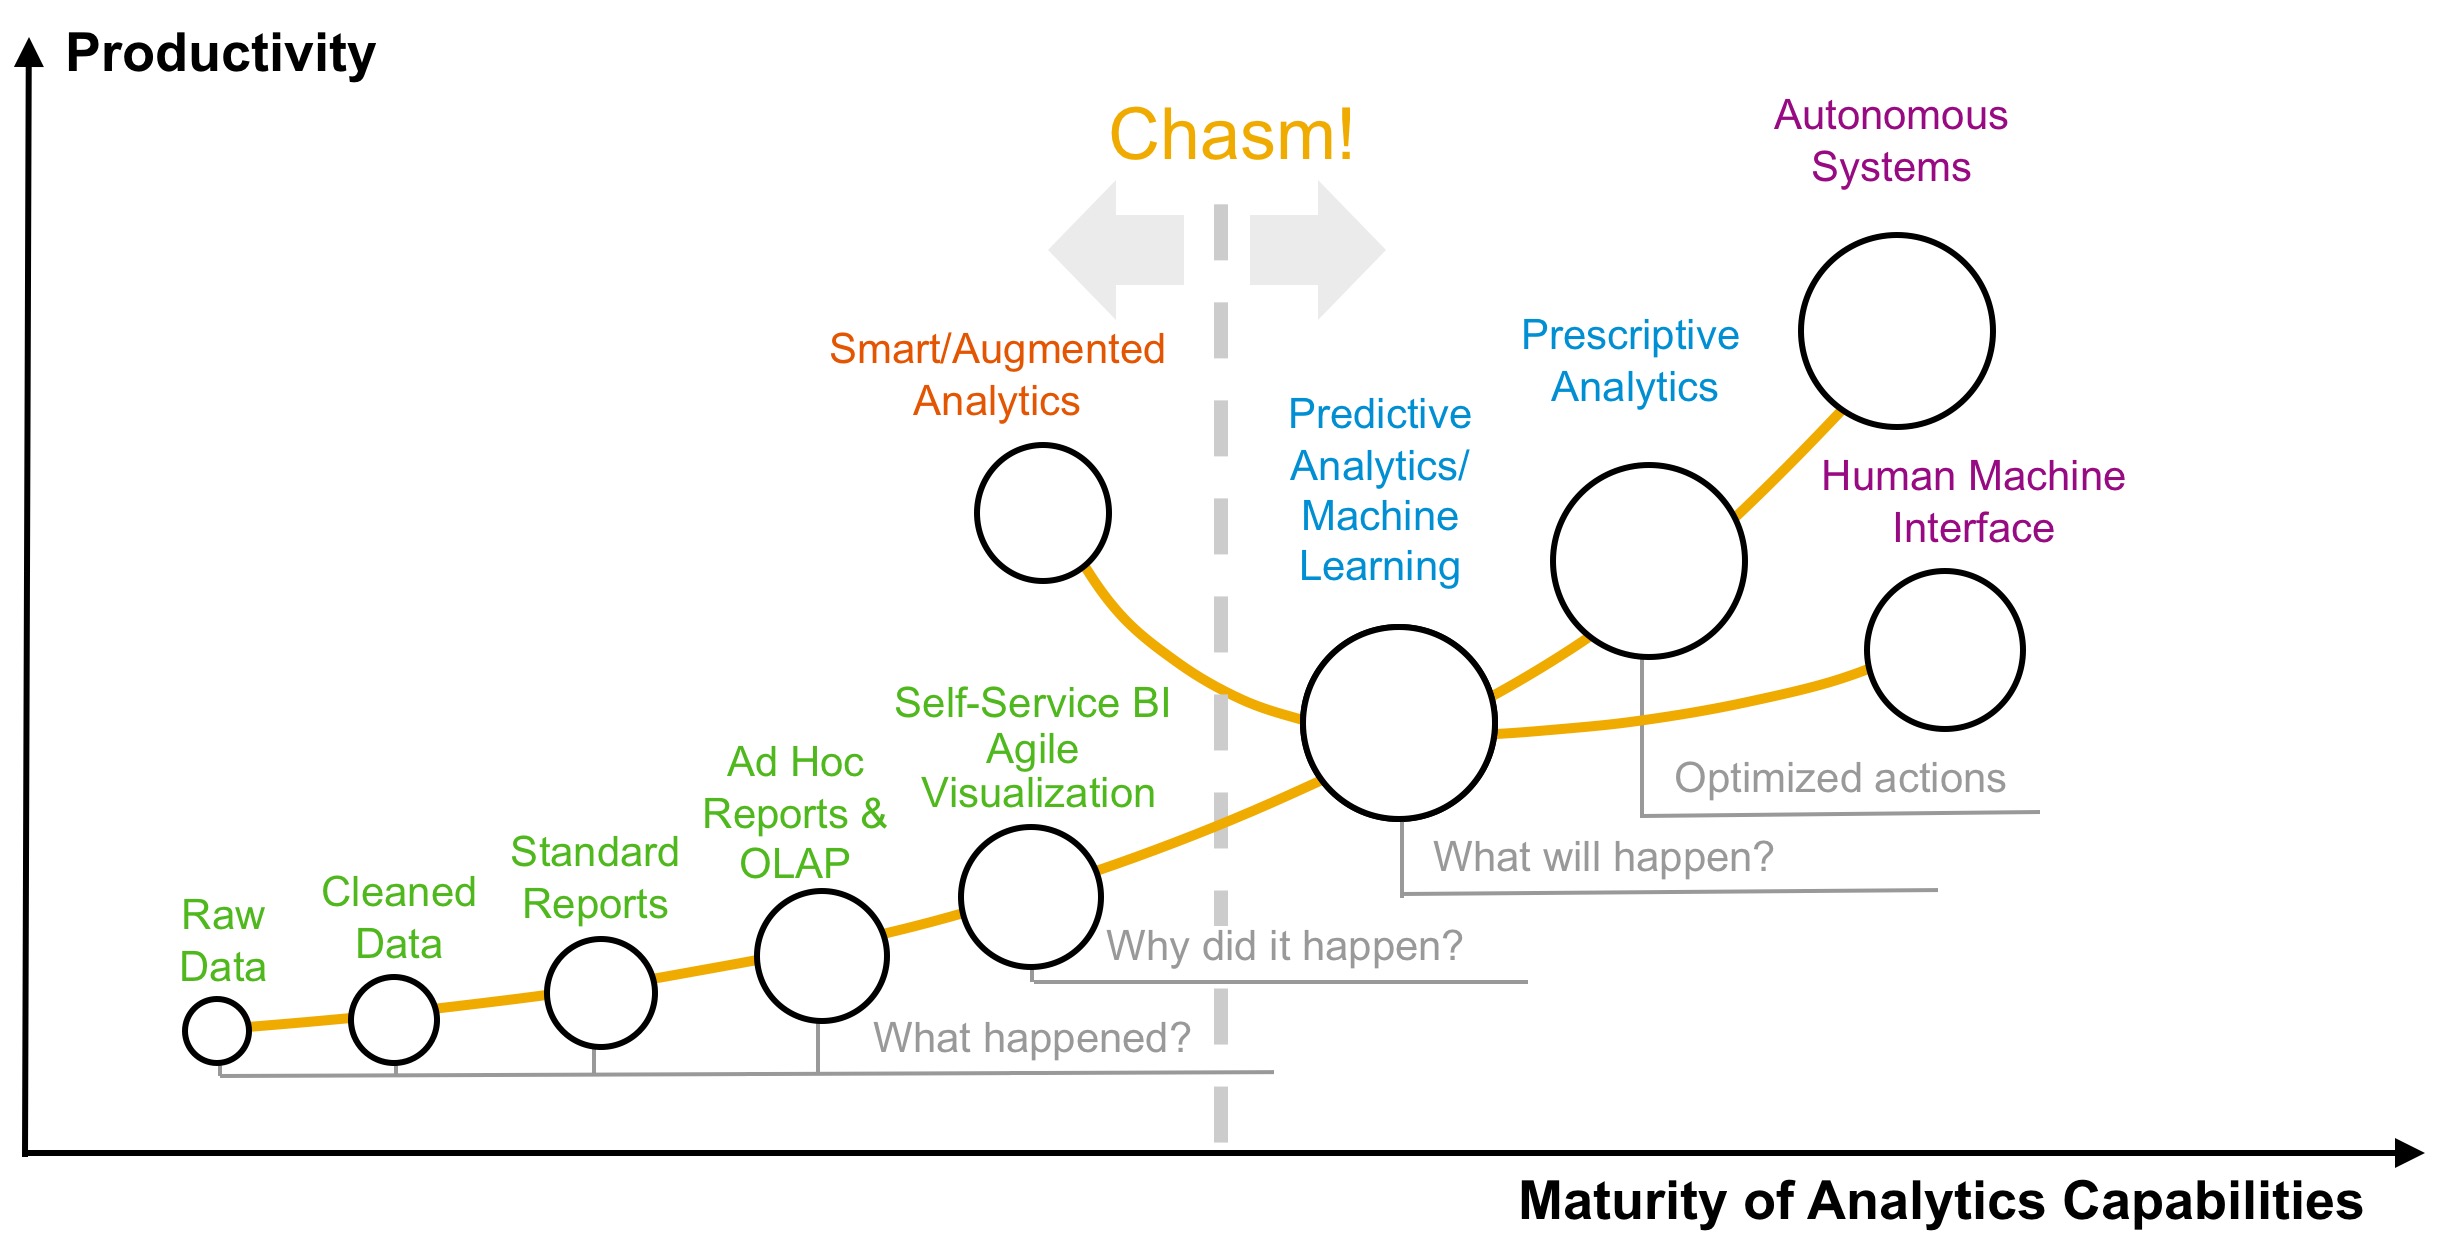 Predictive Is The Next Step In Analytics Maturity? It’s More Complicated Than That!